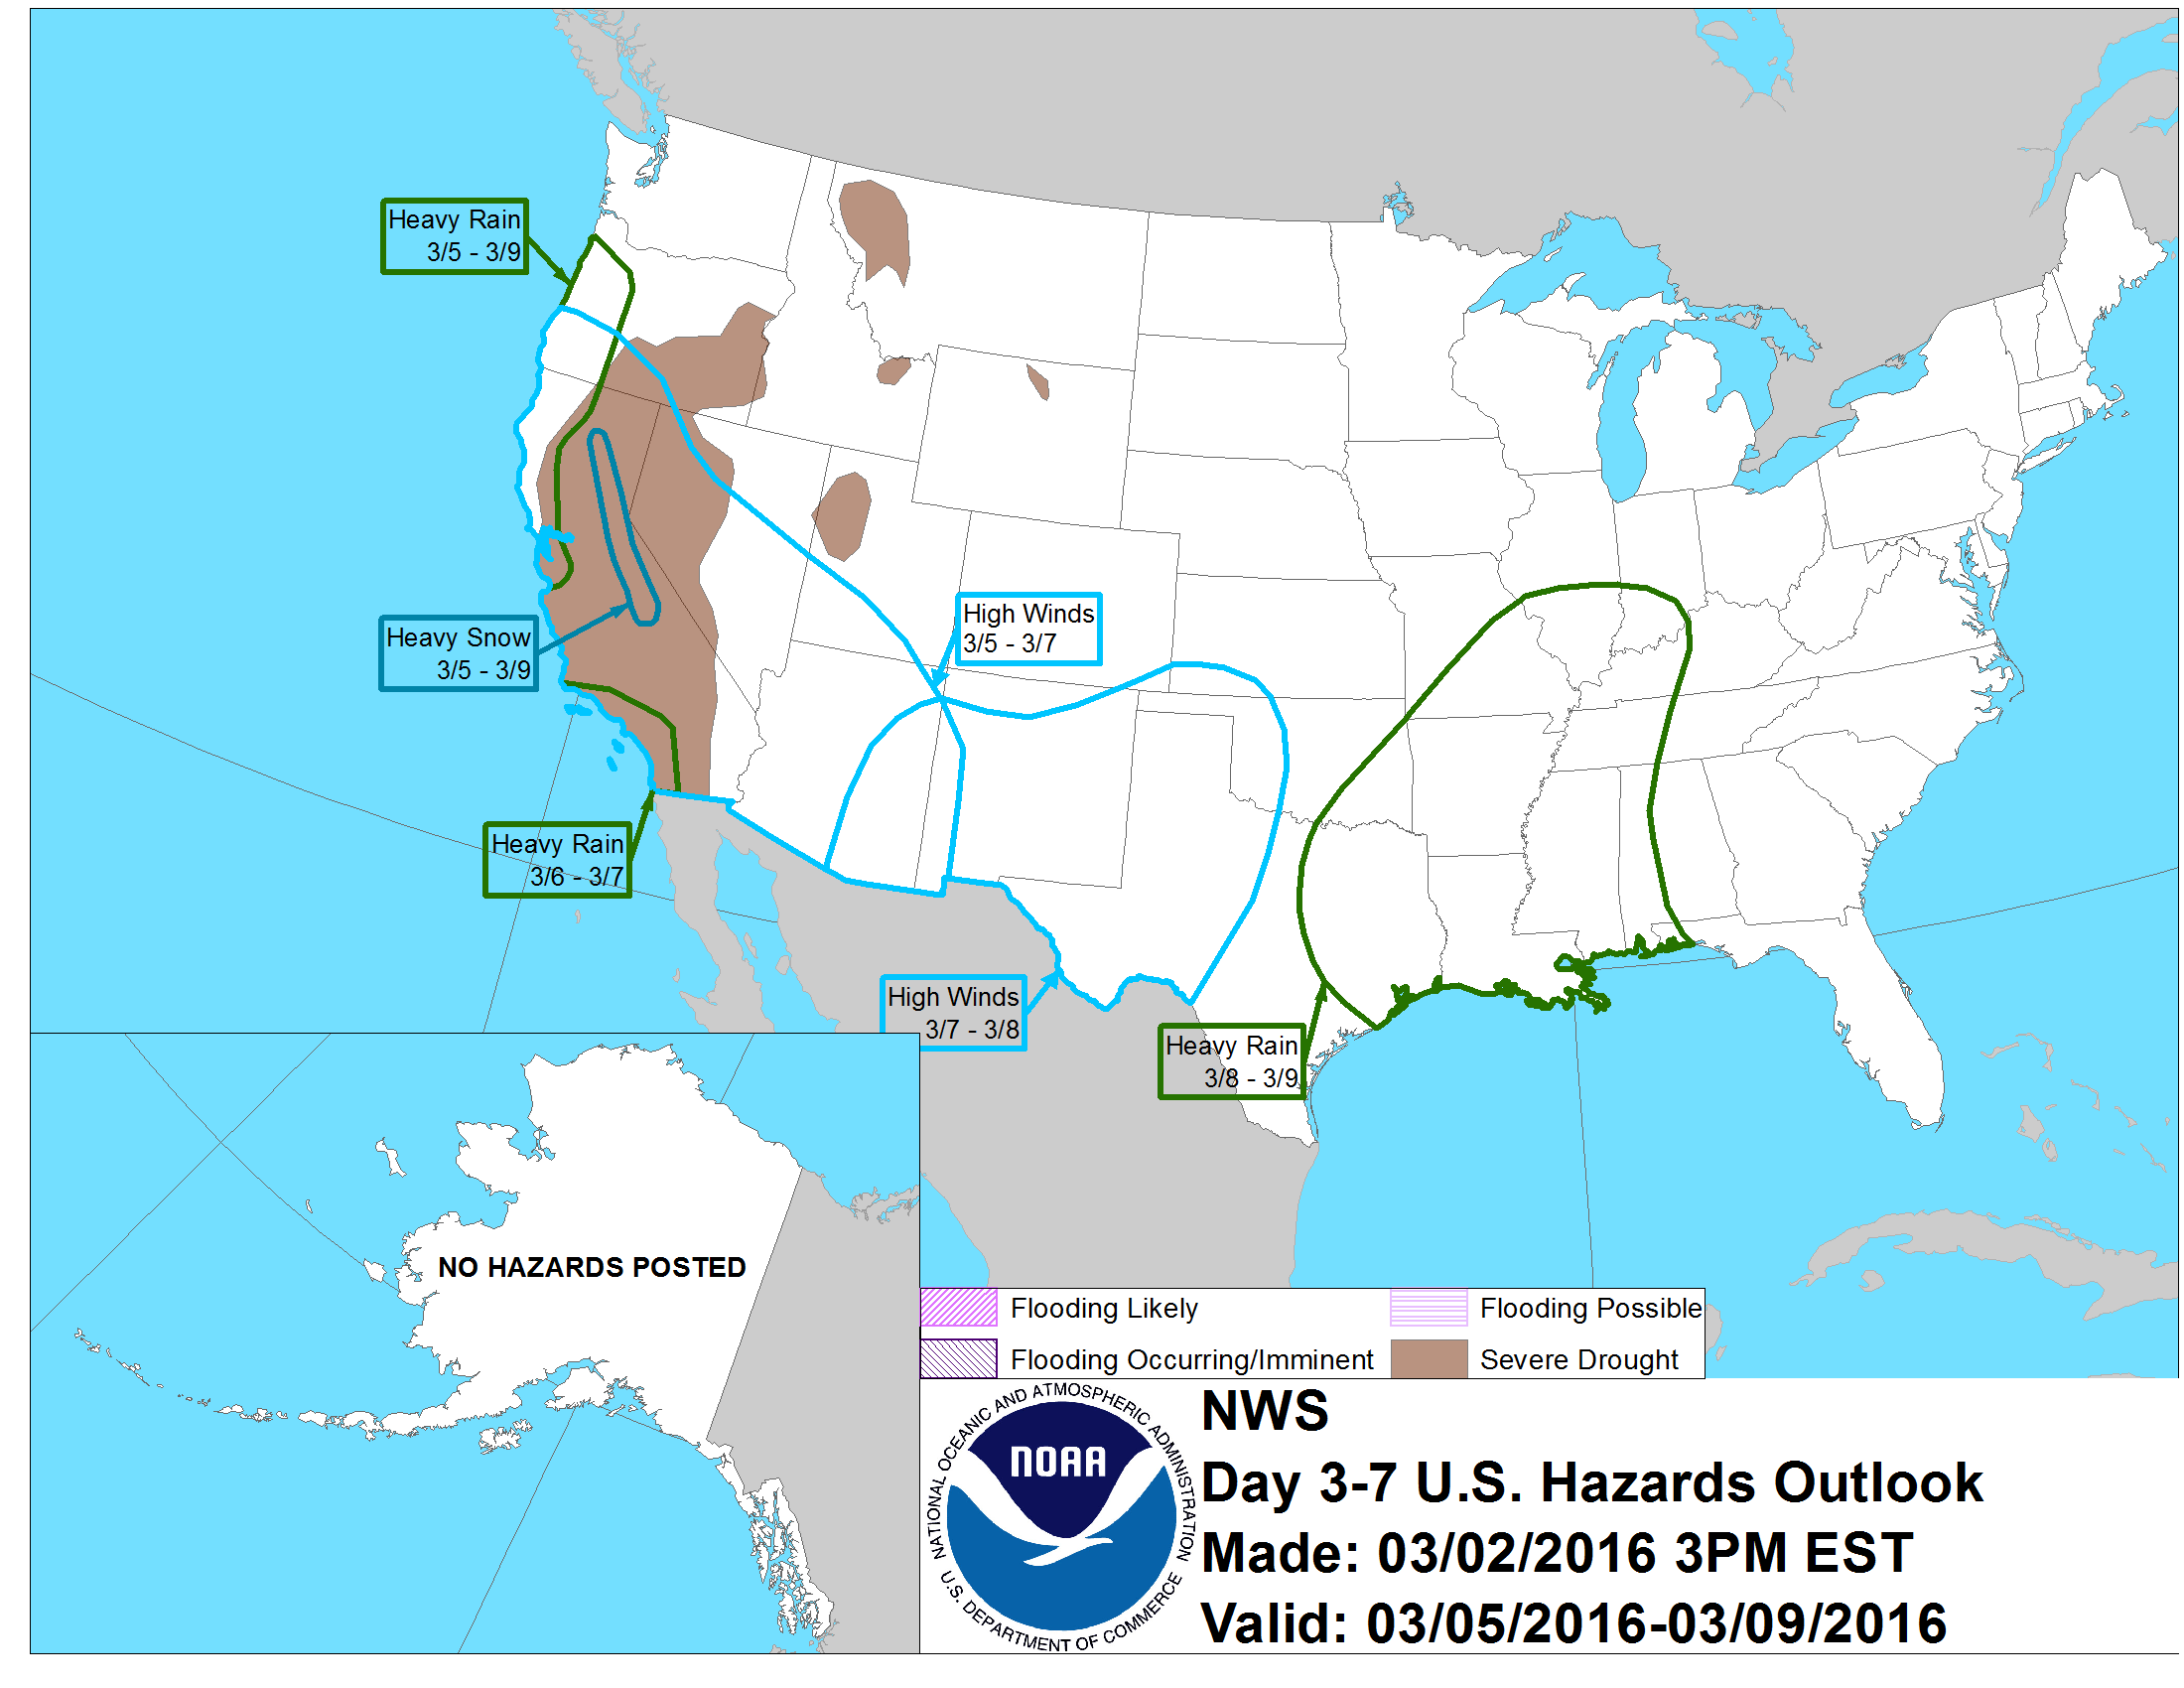 "Heavy snow" forecast in CA March 10-14th. image: noaa, today